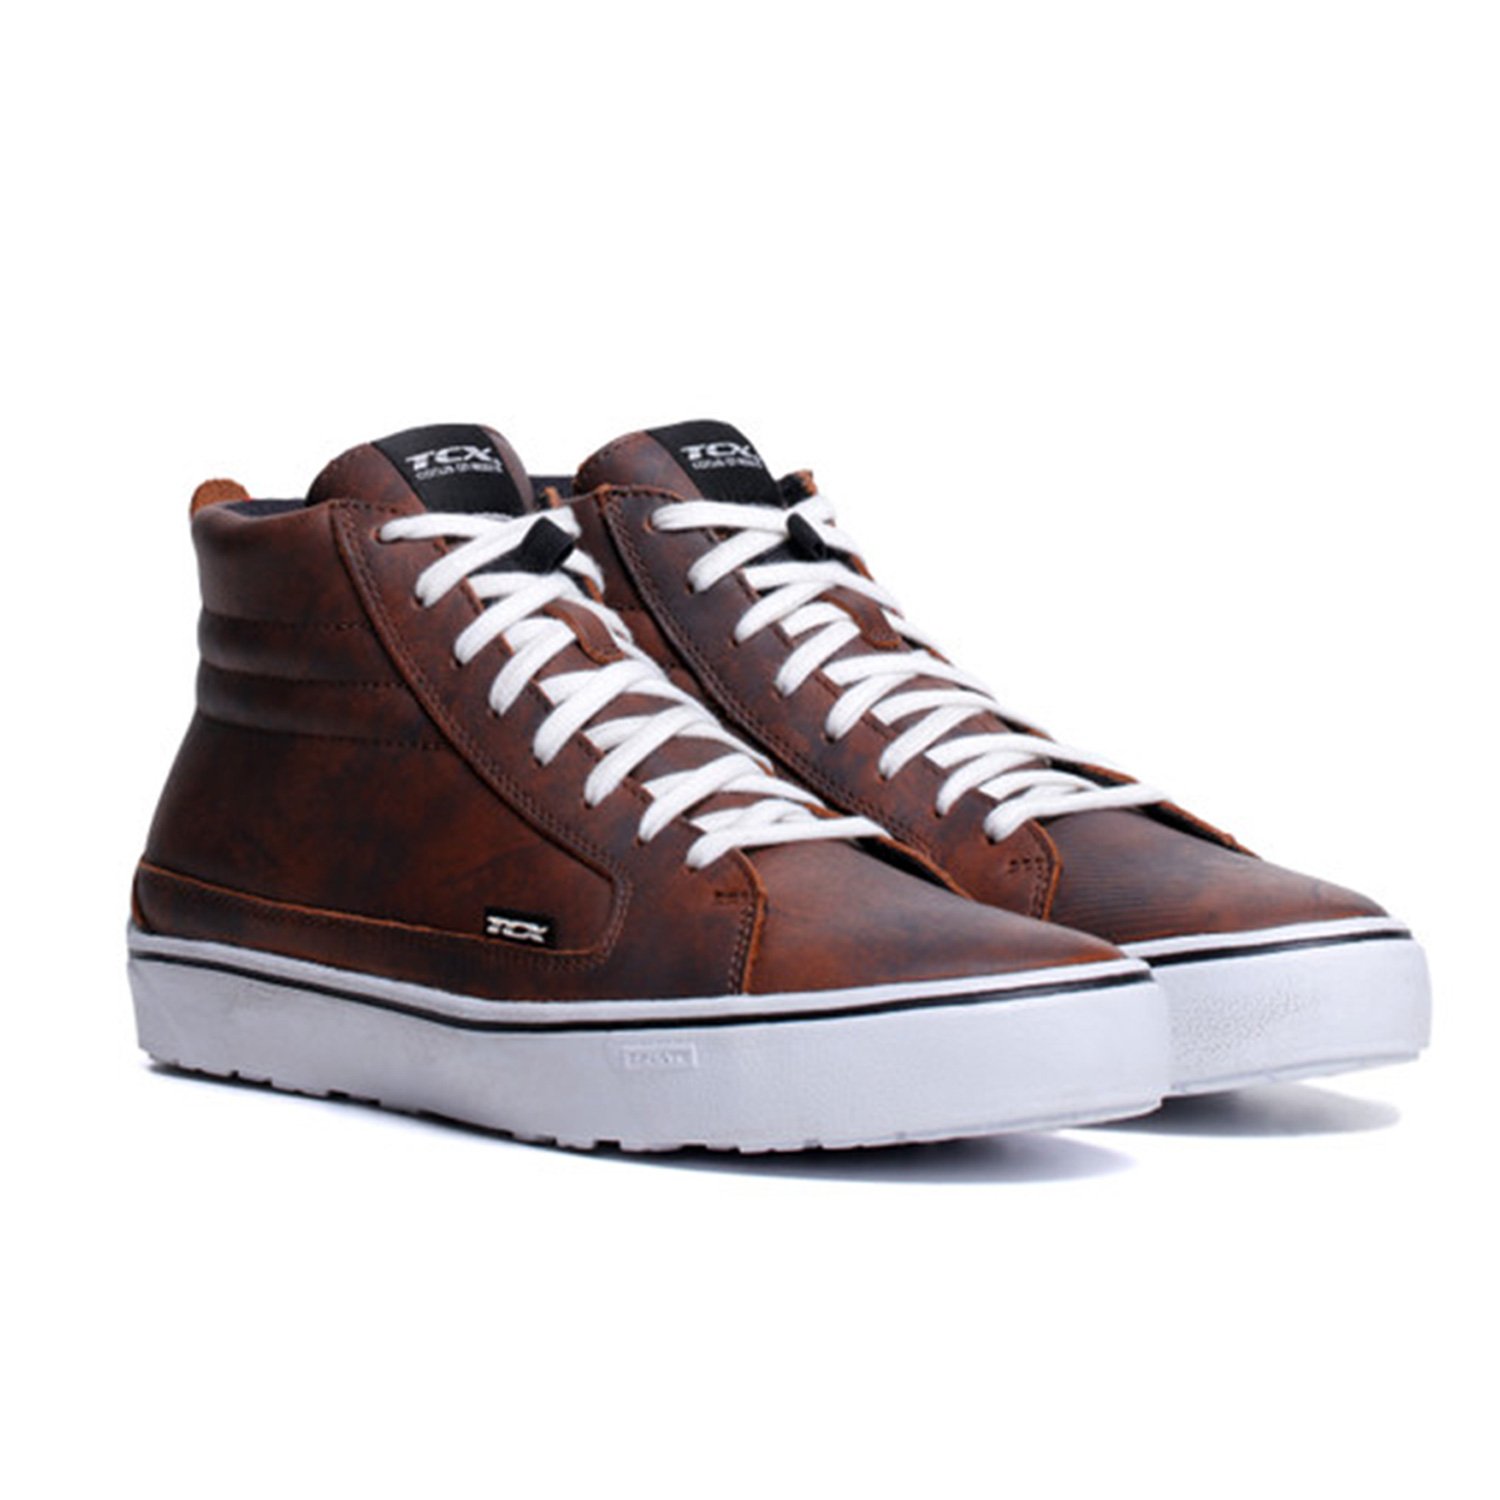 Image of EU TCX Street 3 WP Marron Blanc Chaussures Taille 43